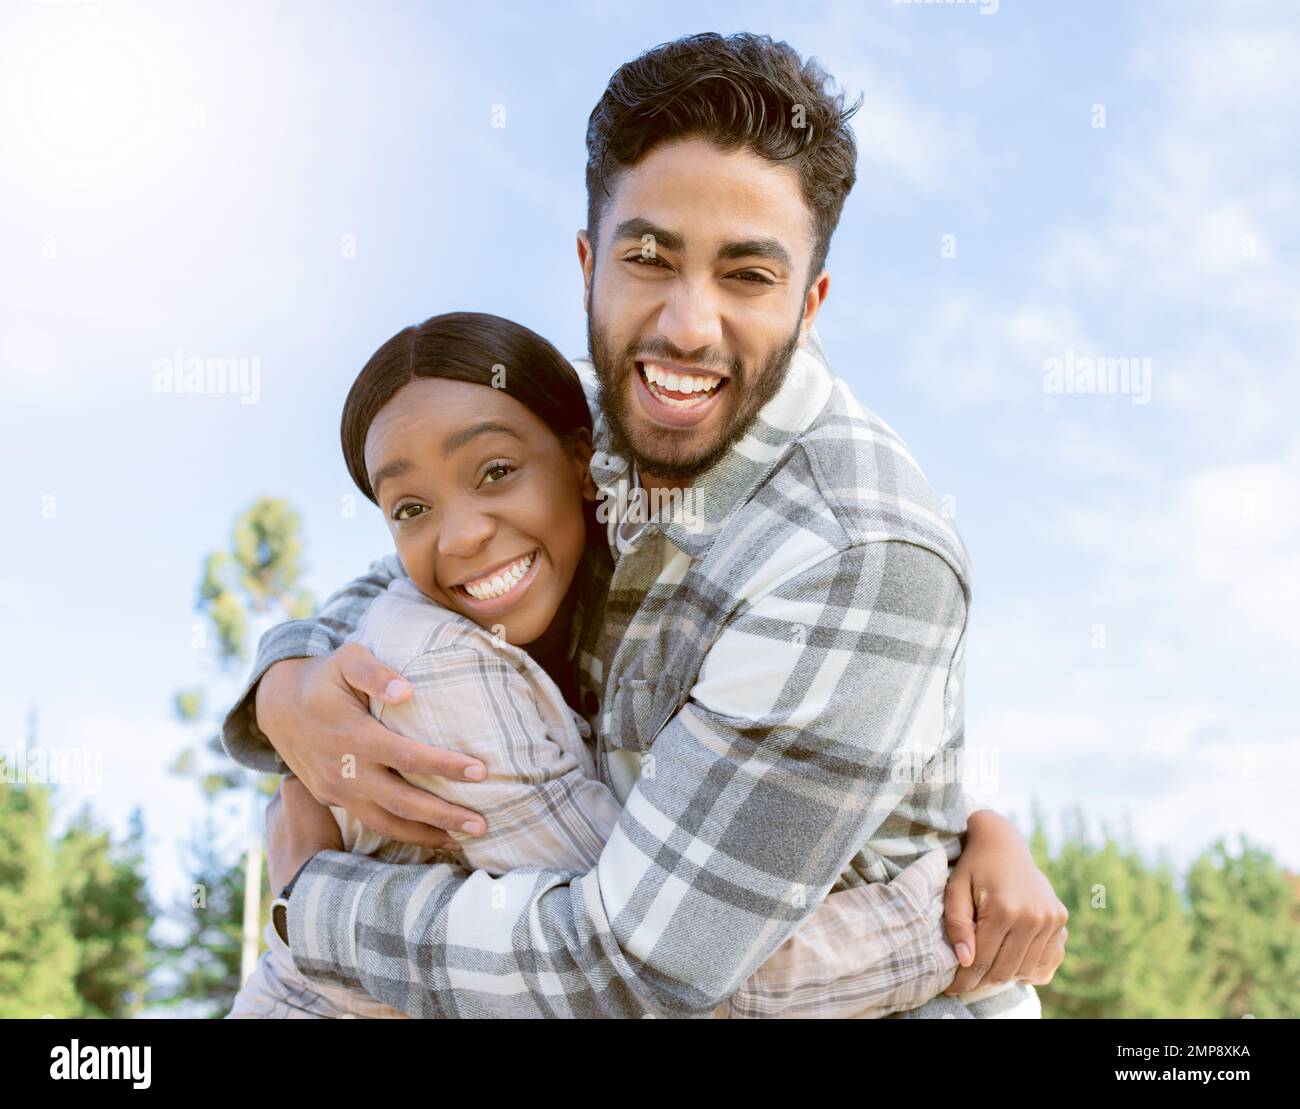 Couple, portrait smile and hug for summer vacation, travel or holiday break together outdoors. Happy man and woman hugging, smiling and enjoying Stock Photo